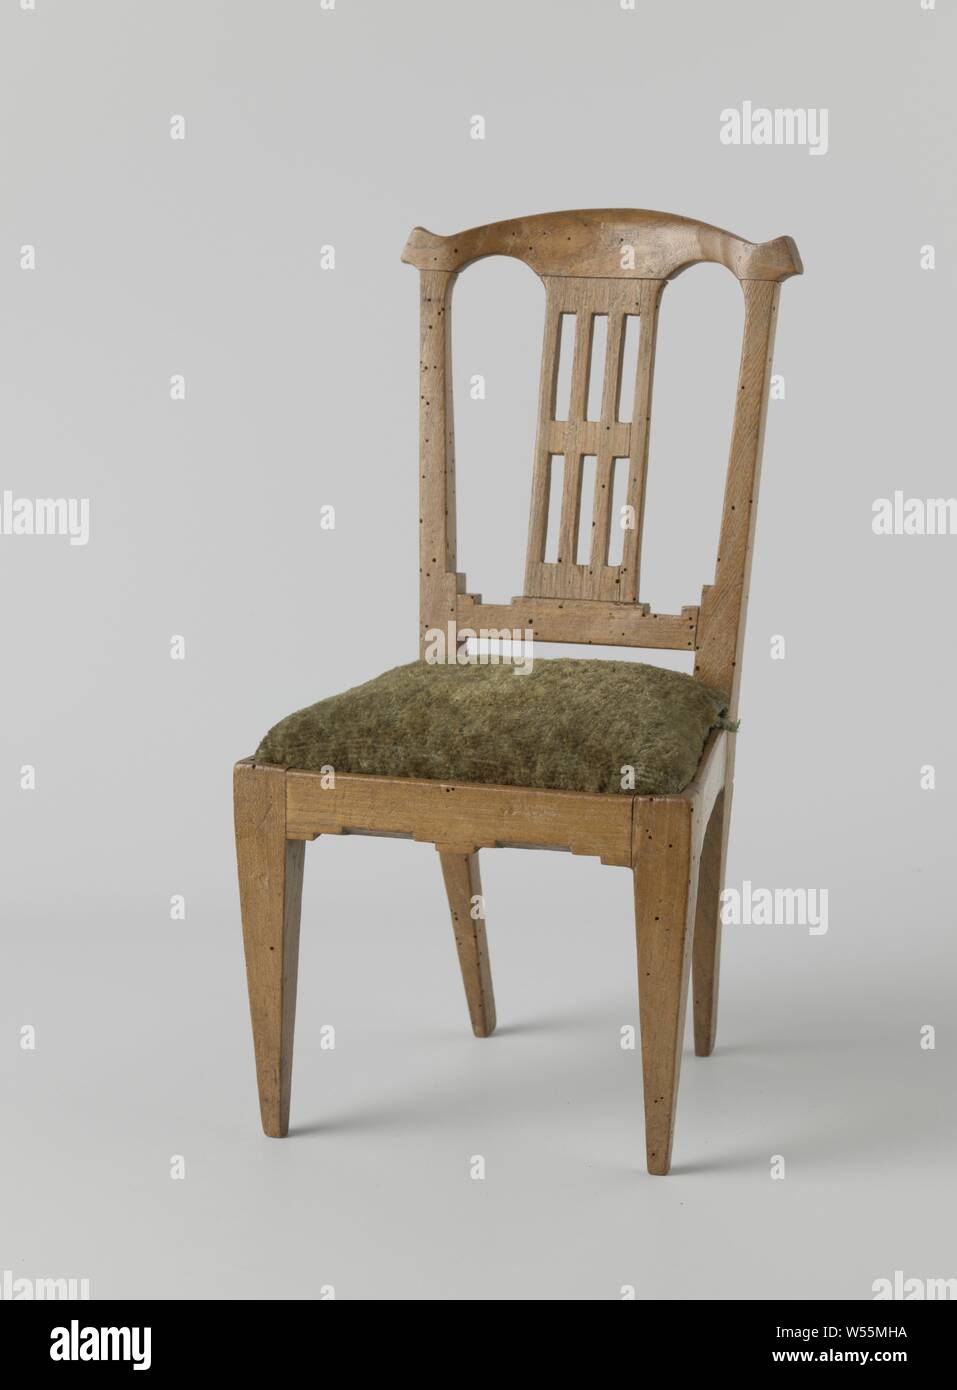 Furniture, Chair made of elm wood with square, rejuvenating legs downwards. The back is open with two arches, the central lane has rectangular breaks. The chair carries a loose cushion of green fabric., anonymous, Northern Netherlands, 1800, elm (wood), h 37 cm × w 19 cm × d 19 cm Stock Photo